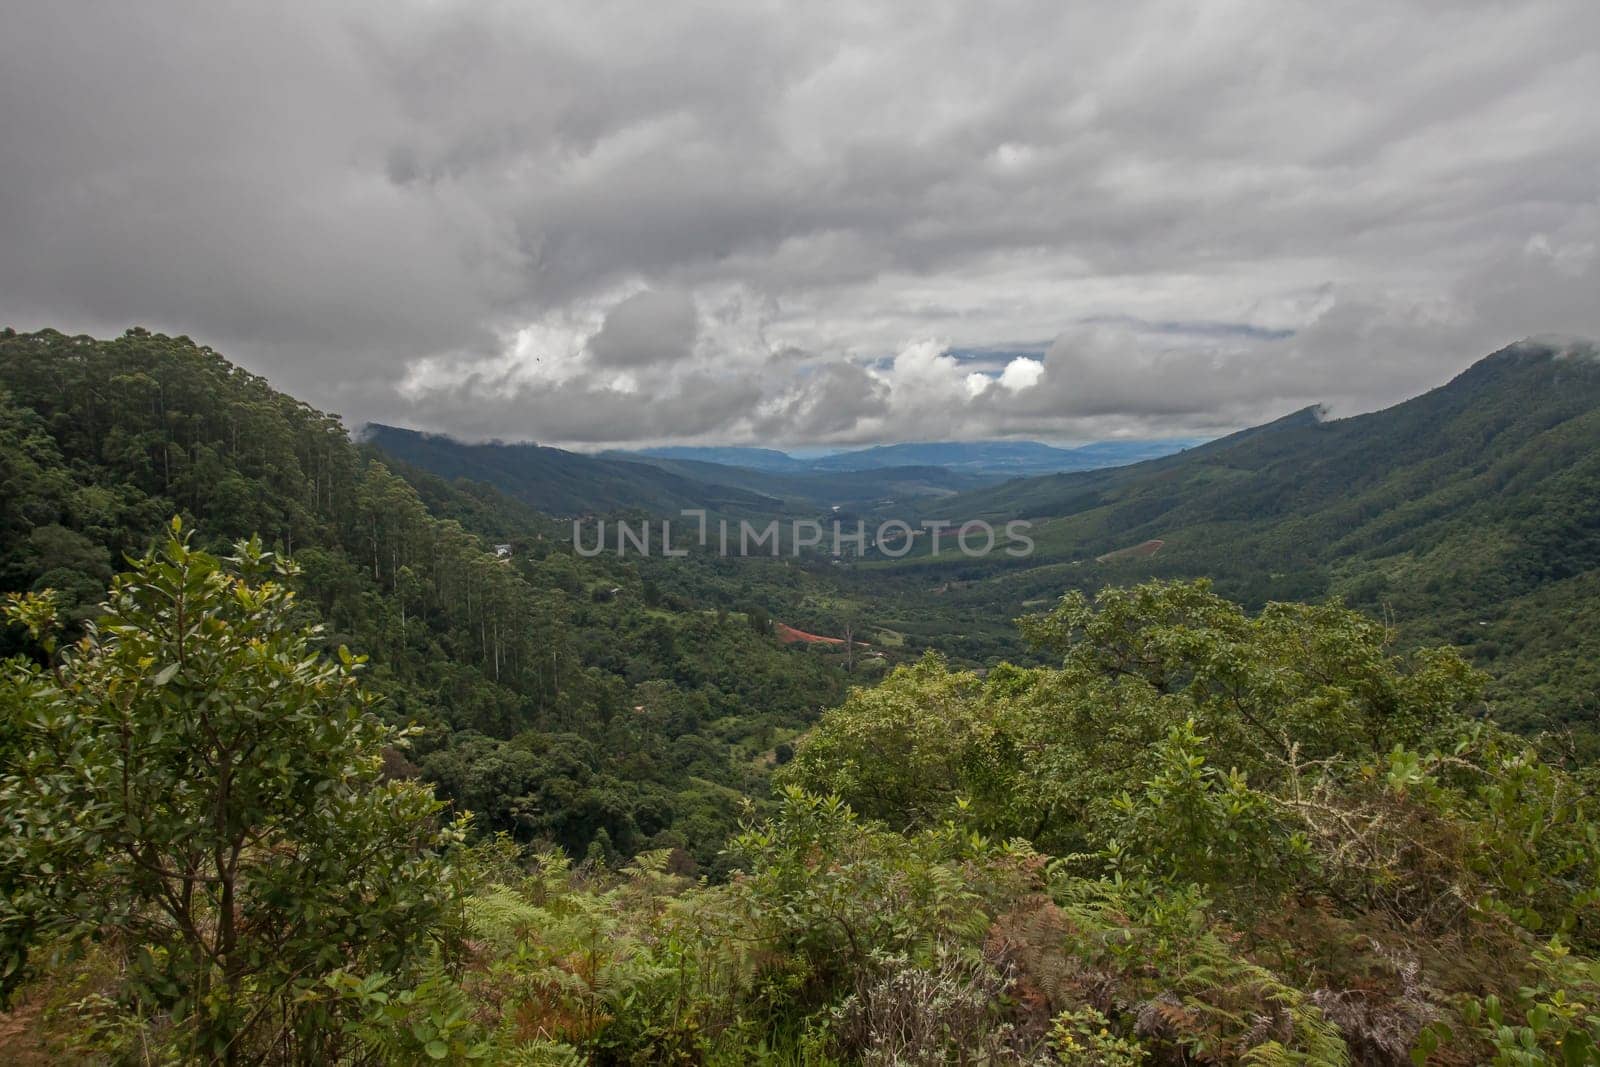 A stormy view over the Magoebaskloof wilderness area seen from the Swartbos Hiking Trail.